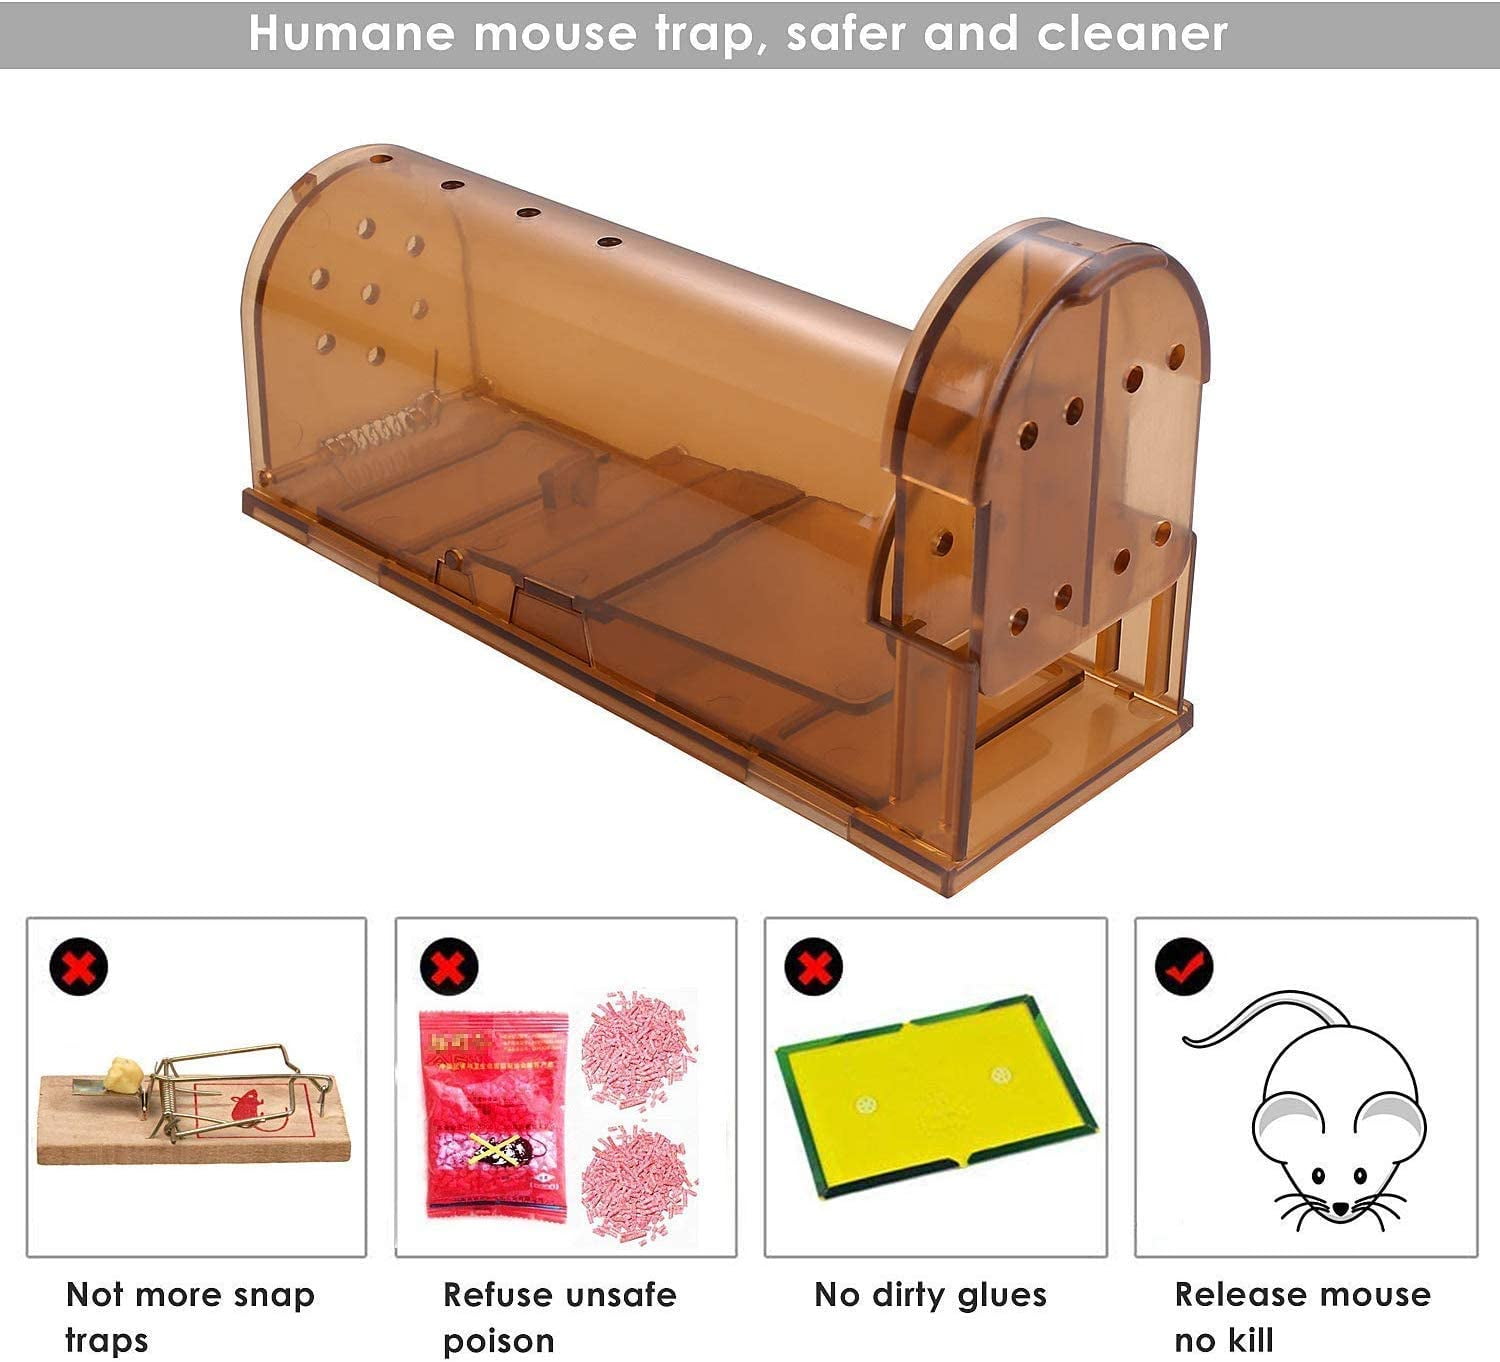 LINRONE Humane Mouse Traps Indoor for Home - Mouse Trap Easy to Set, Reusable and Effective No Kill Mouse Traps,Catch and Release Mouse